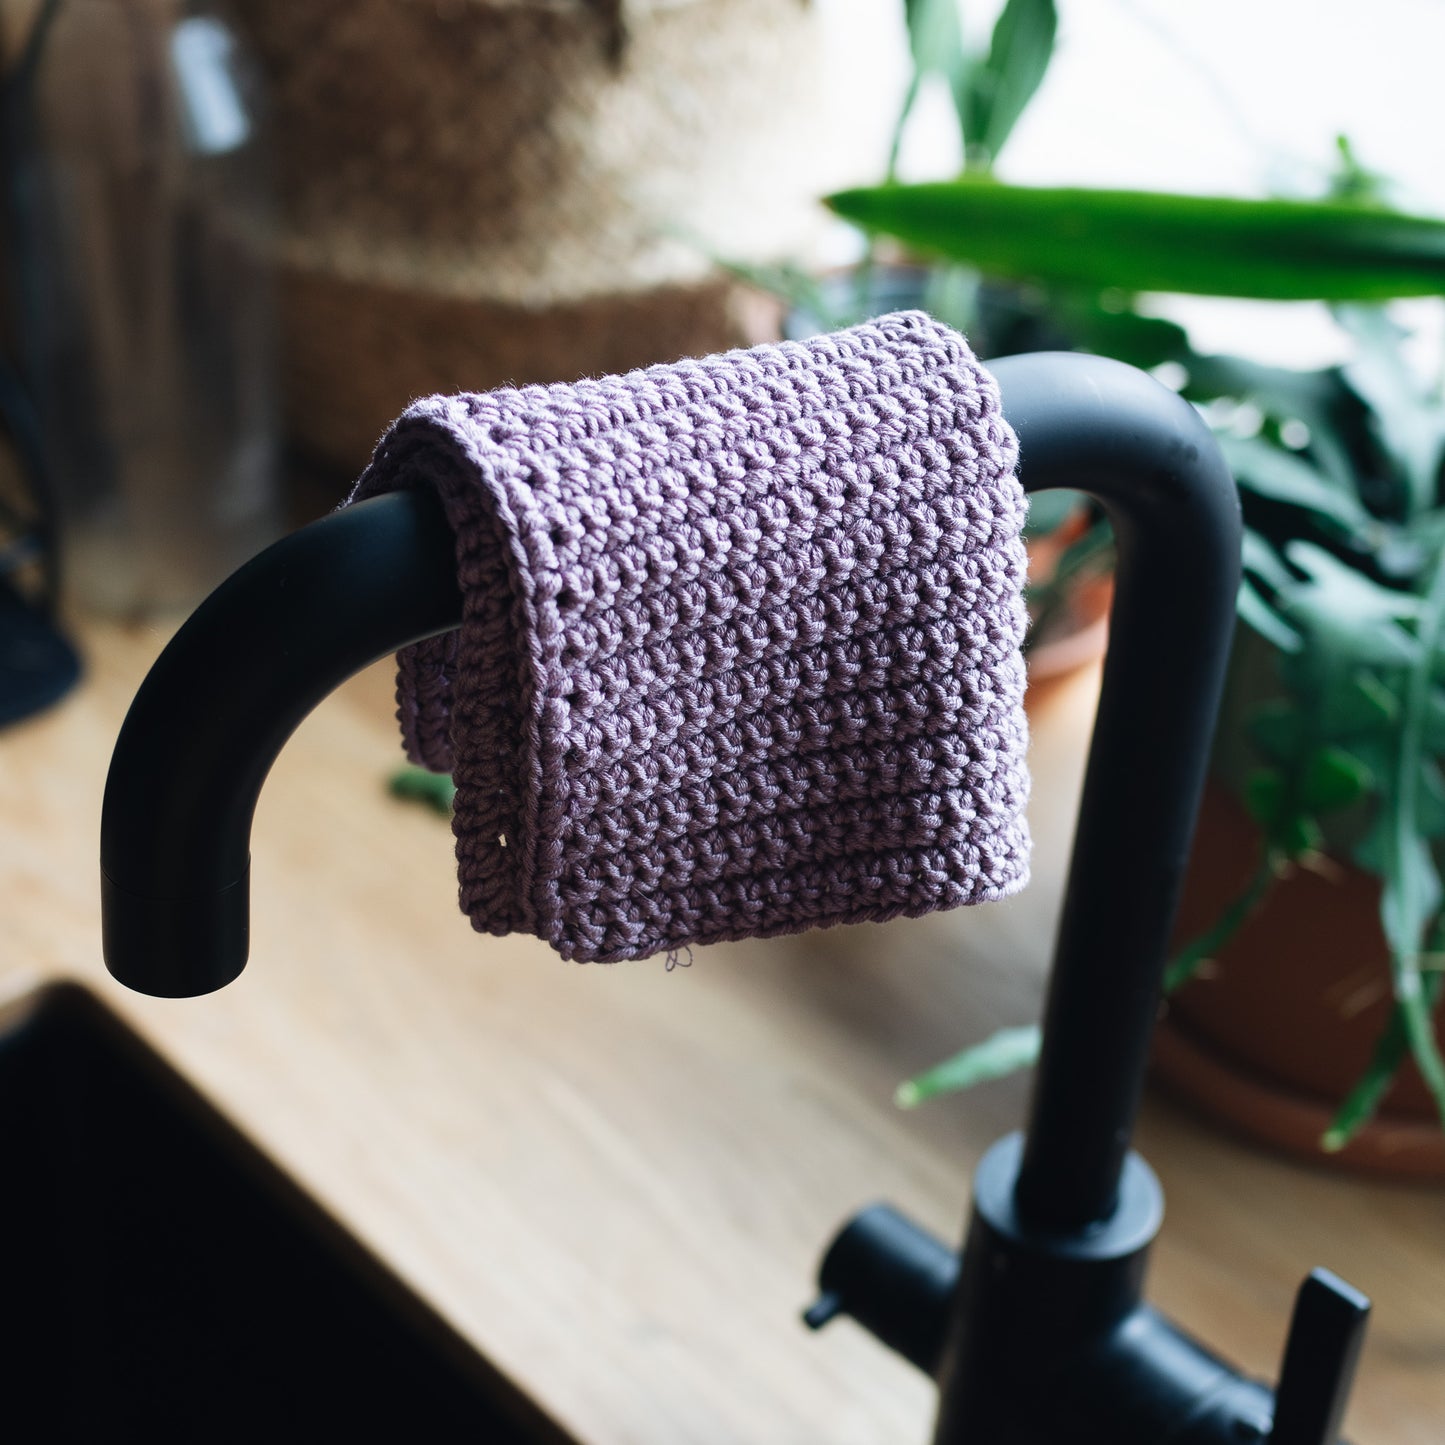 DIY kit: Crocheted cleaning cloth